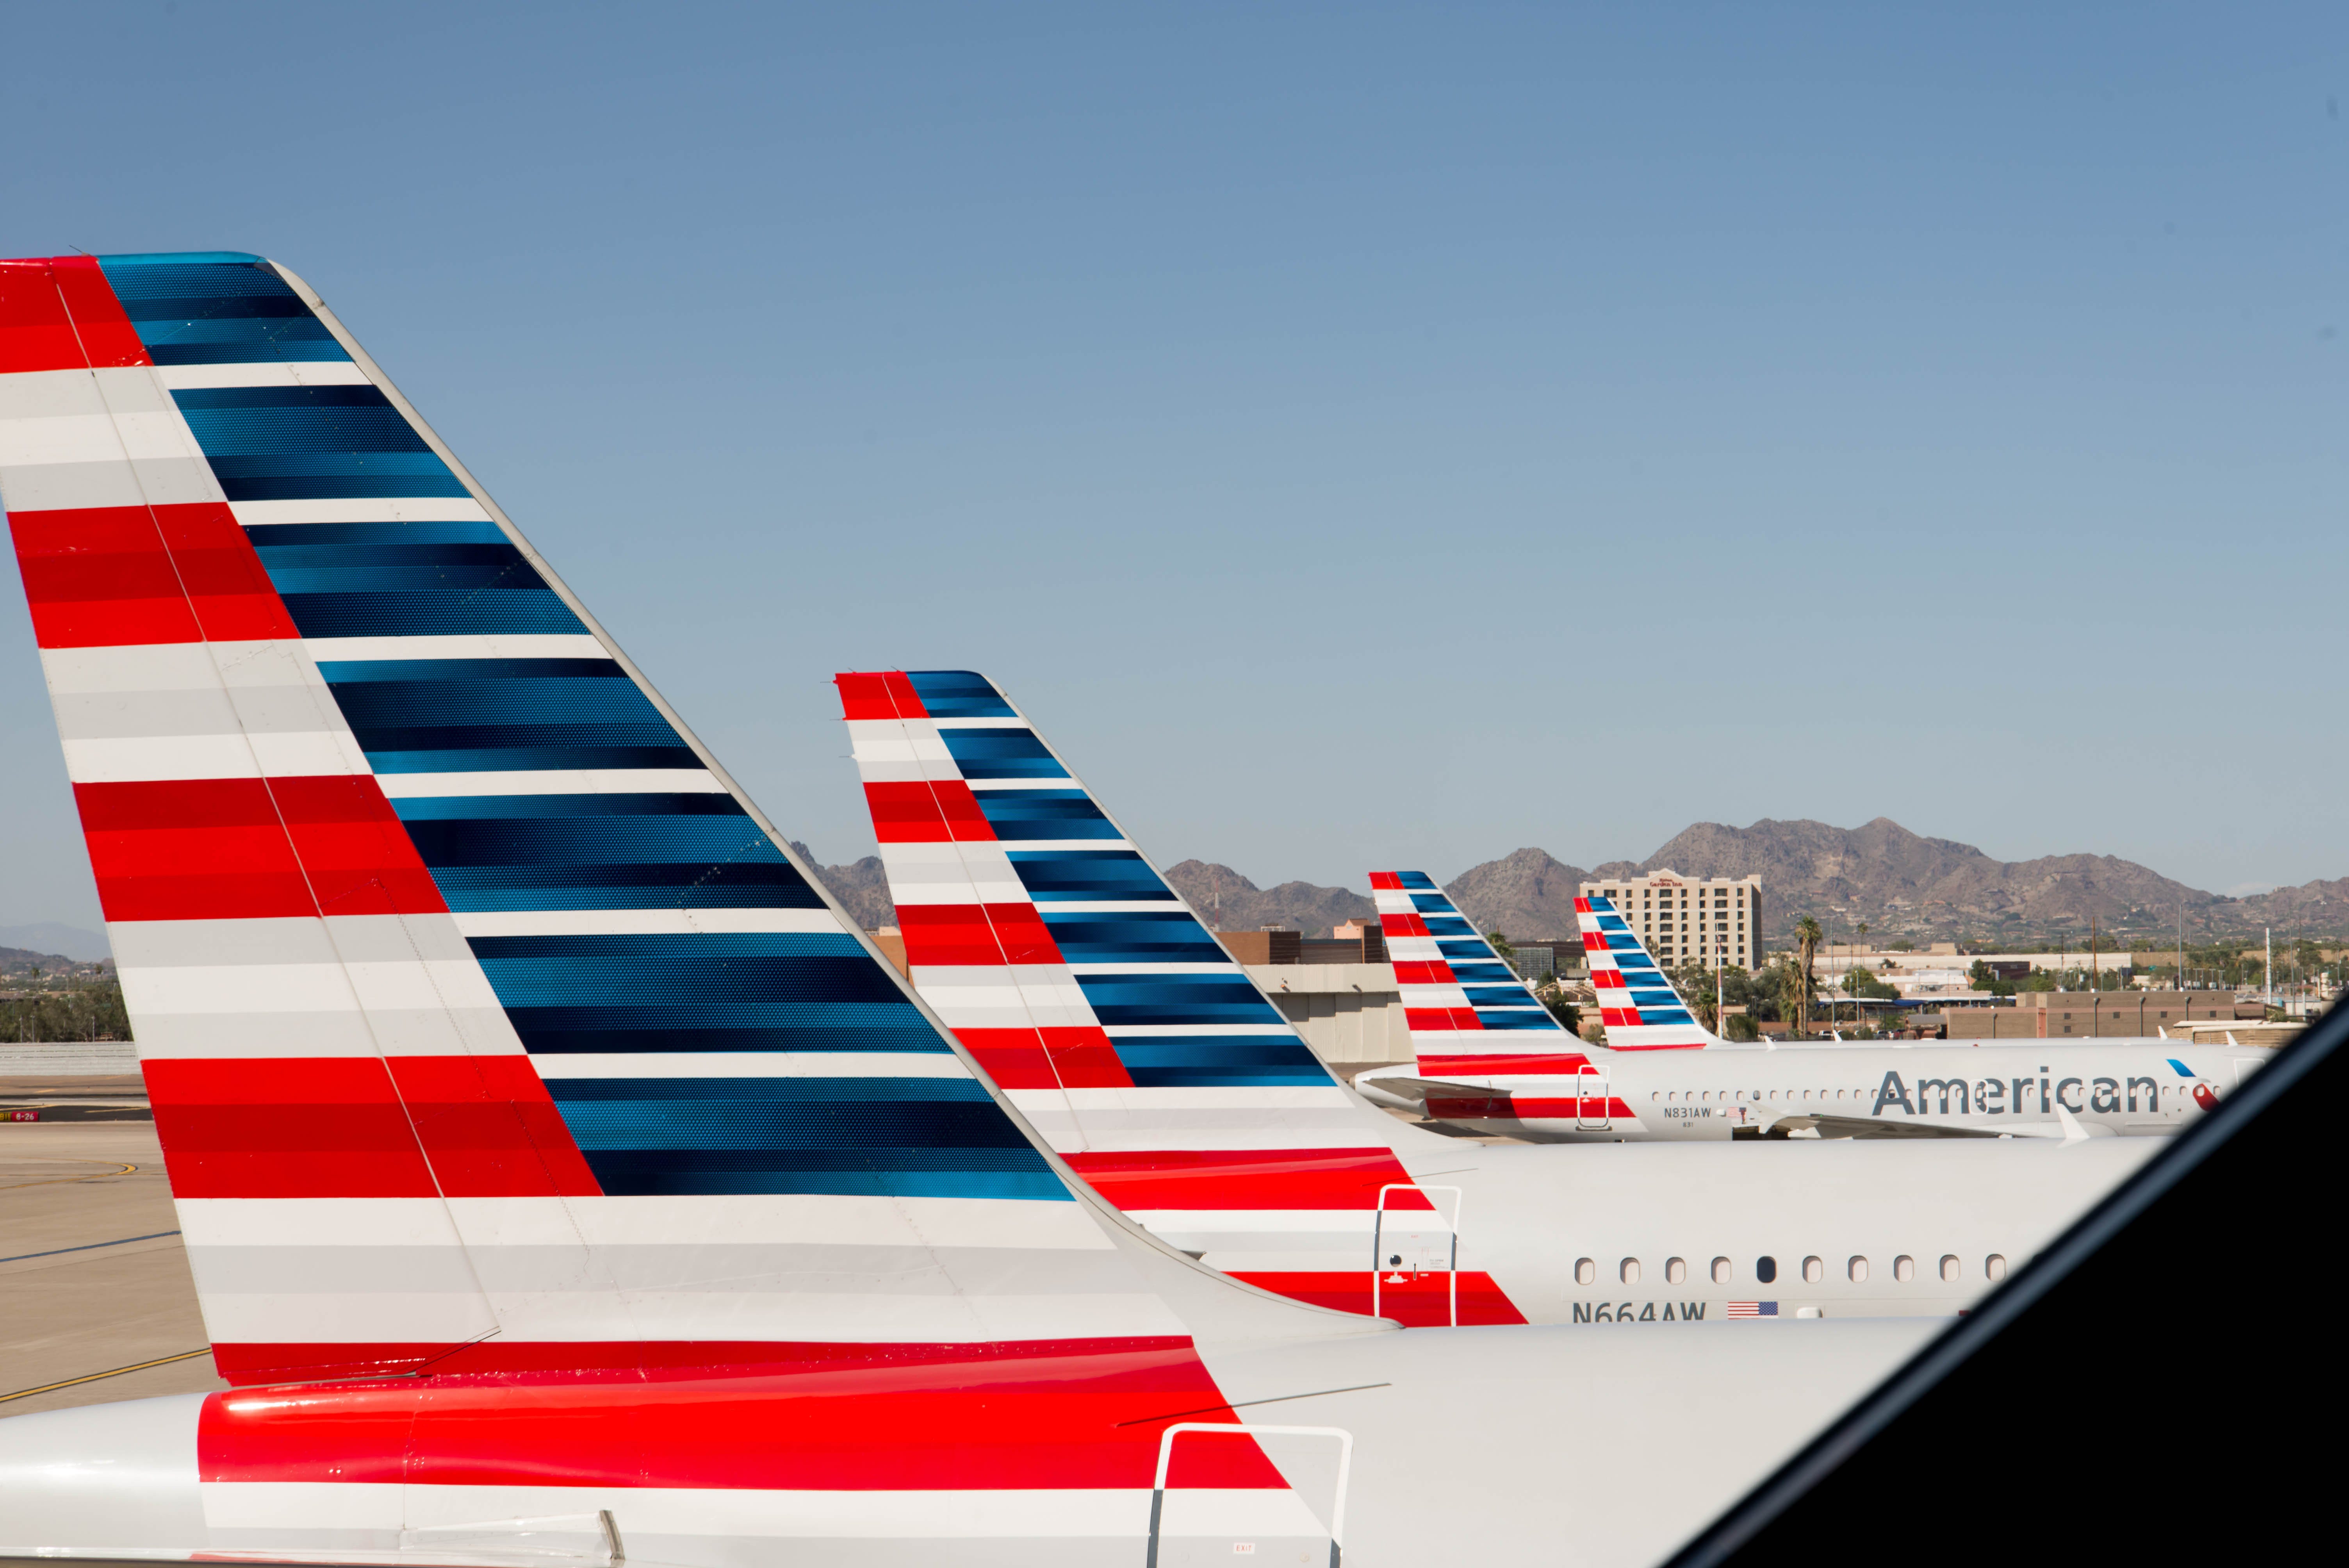 Charting The The Turbulent American Airlines Q4 Earnings Trade With PreMarket Prep